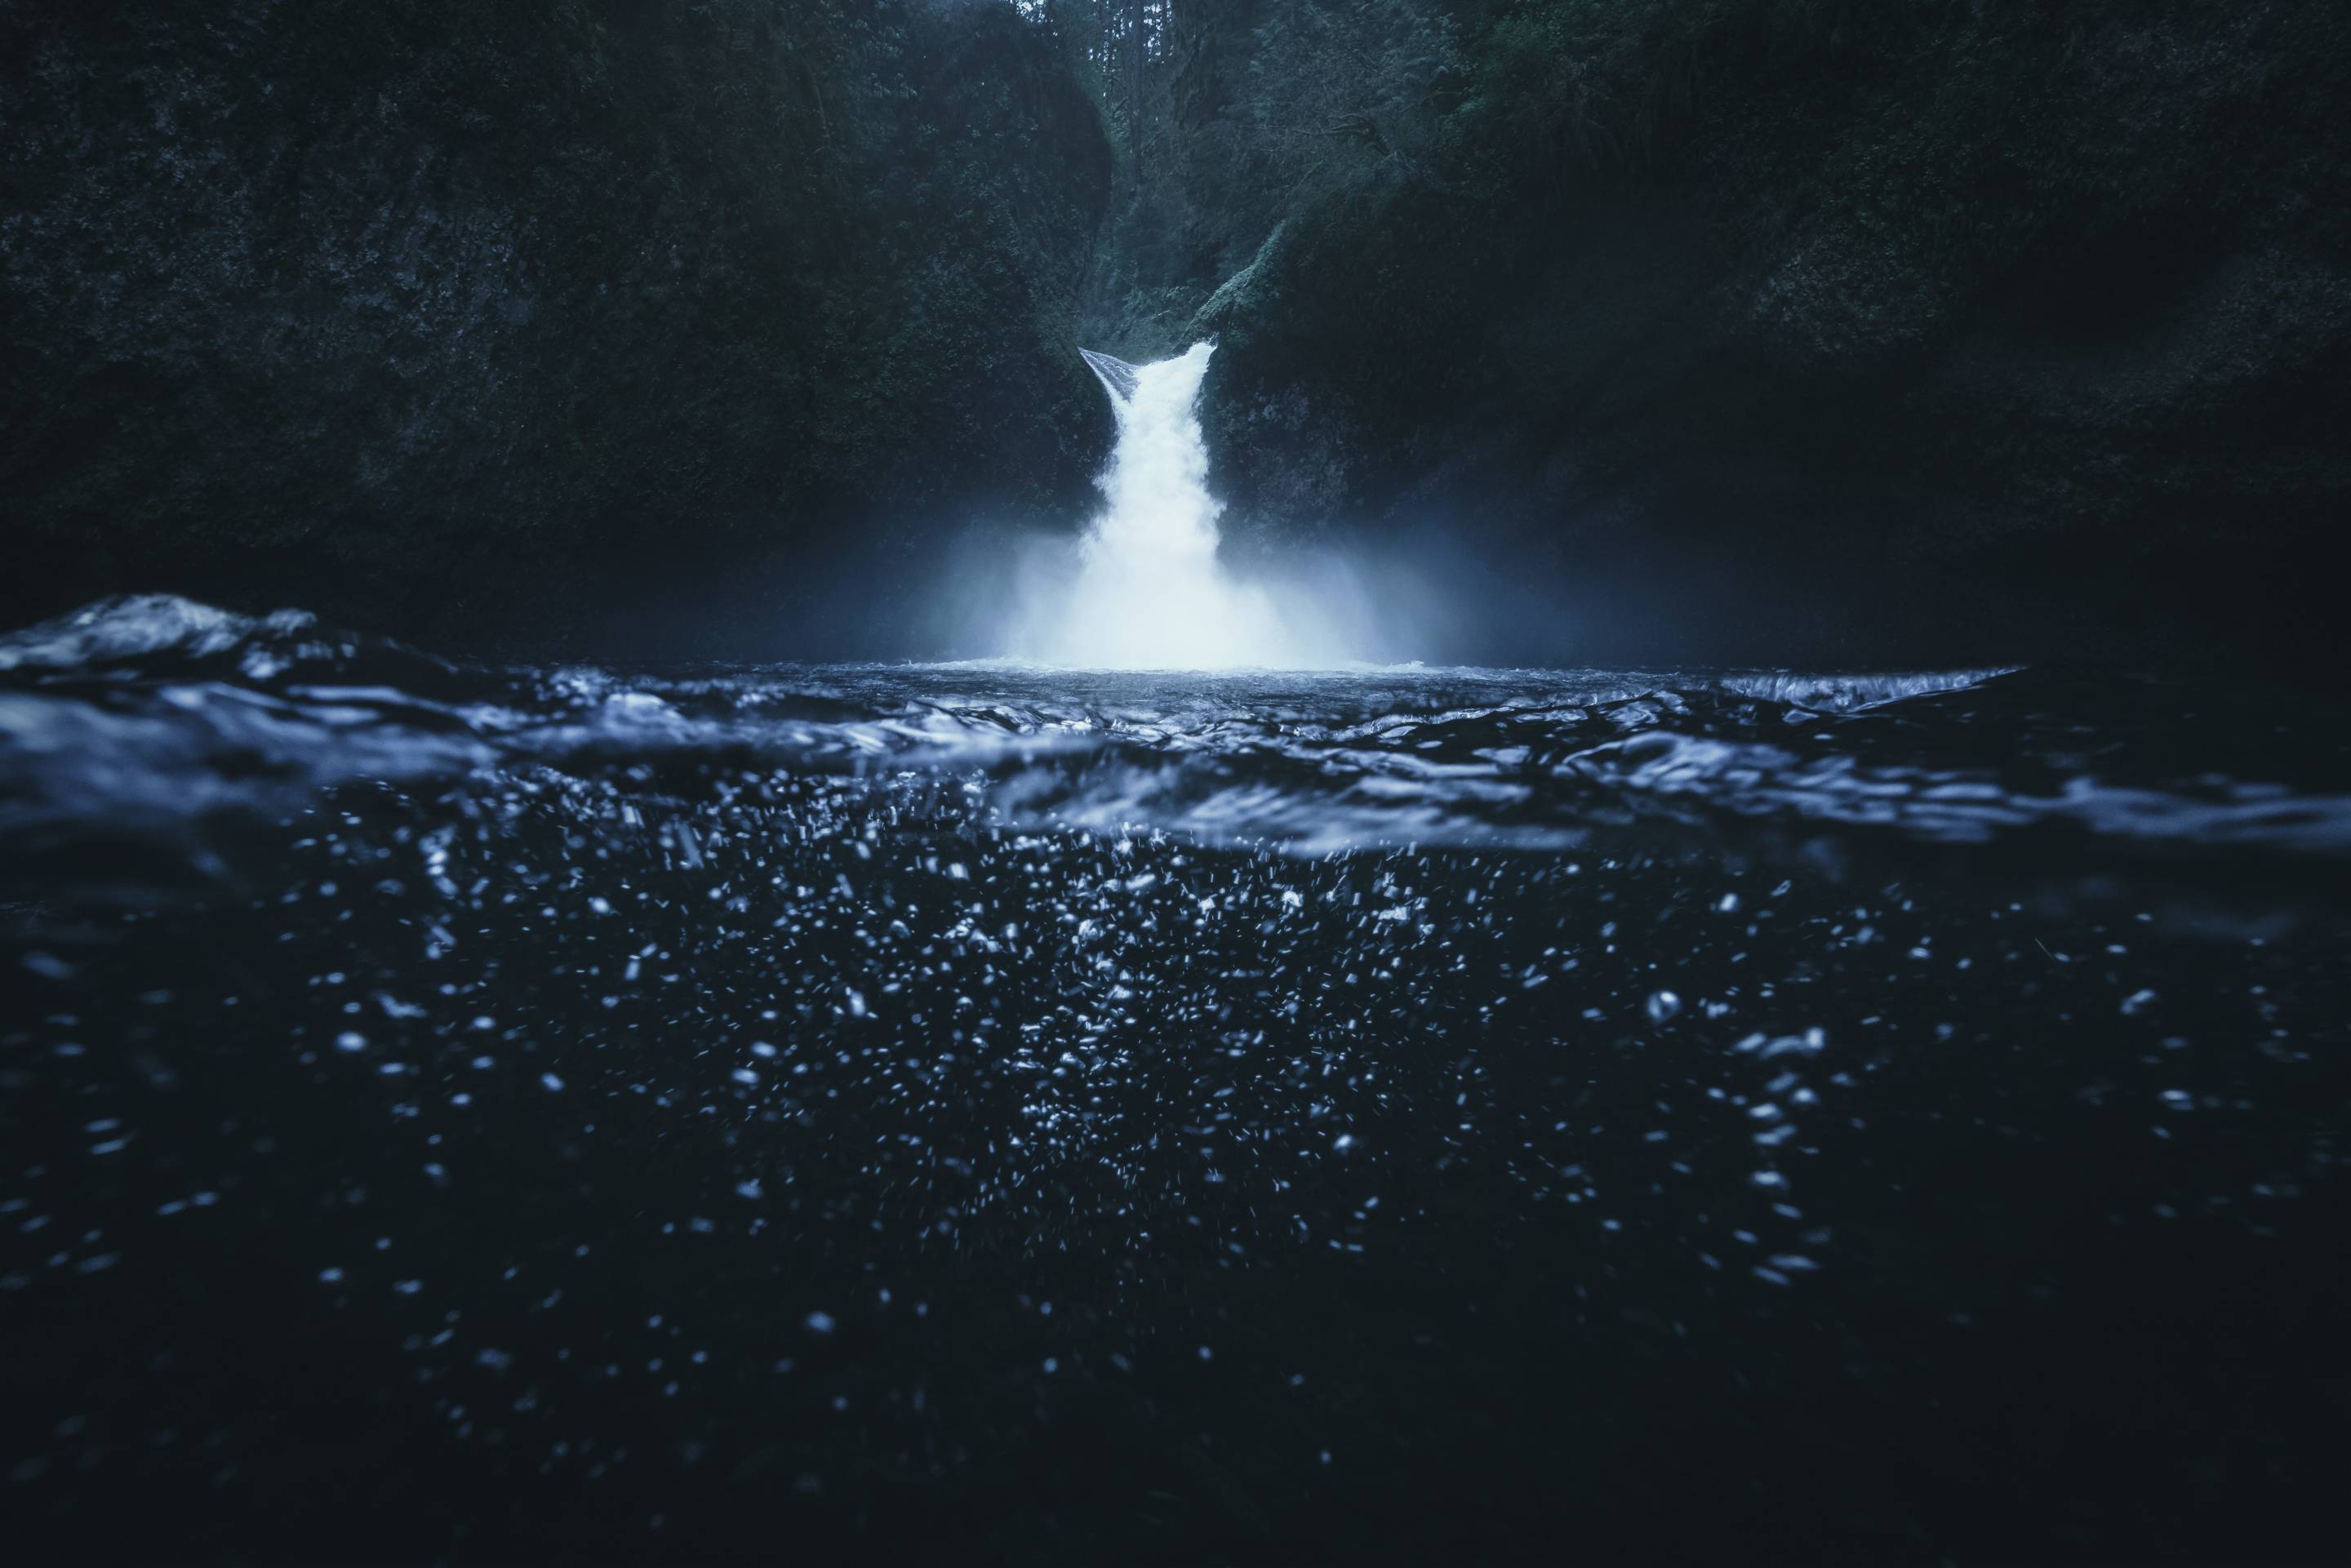 Underwater photography of Punchbowl waterfall in the Columbia River Gorge, Oregon